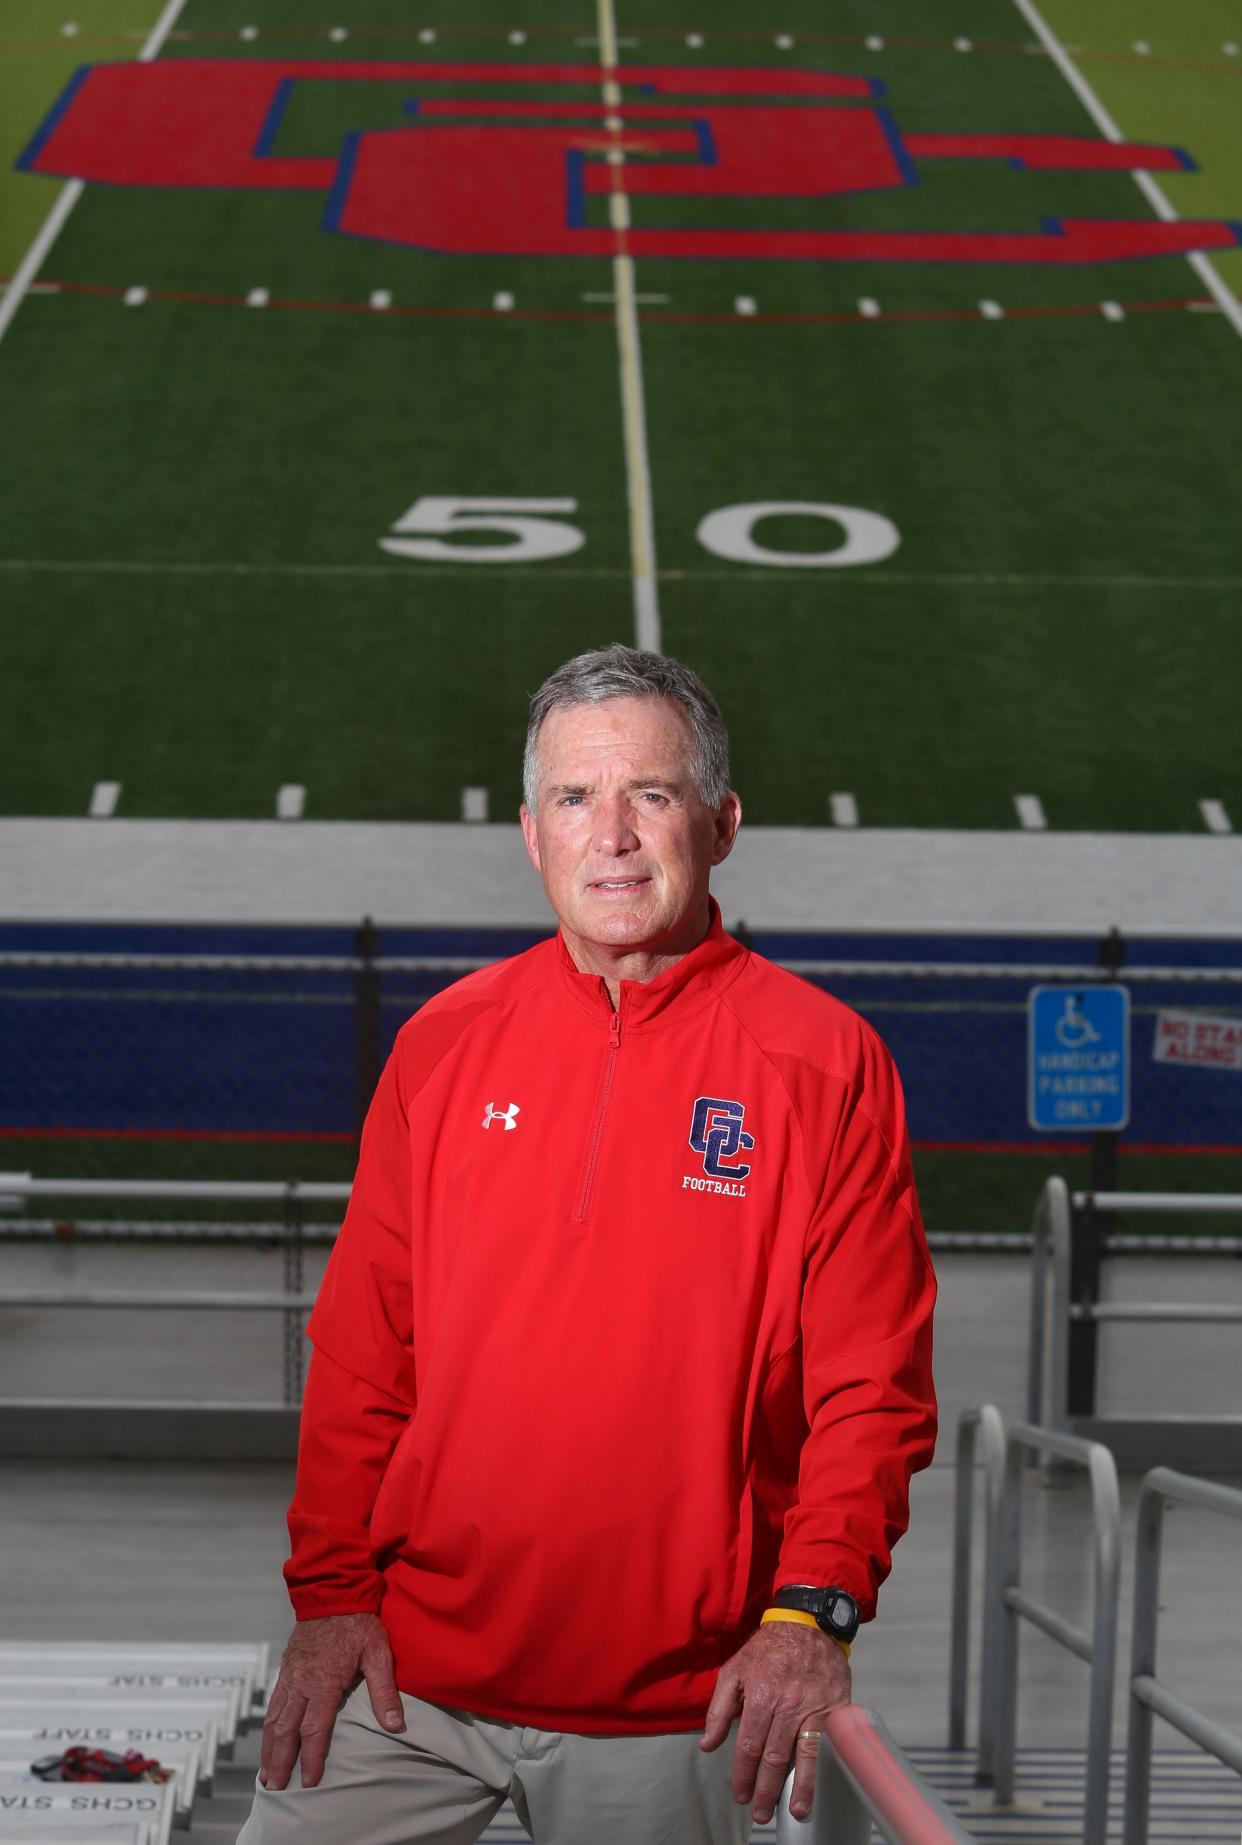 Greg Waits, a 1980 Grove City graduate, has taken over the Dawgs football program after being an assistant coach since 1999. He previously served as boys basketball coach.